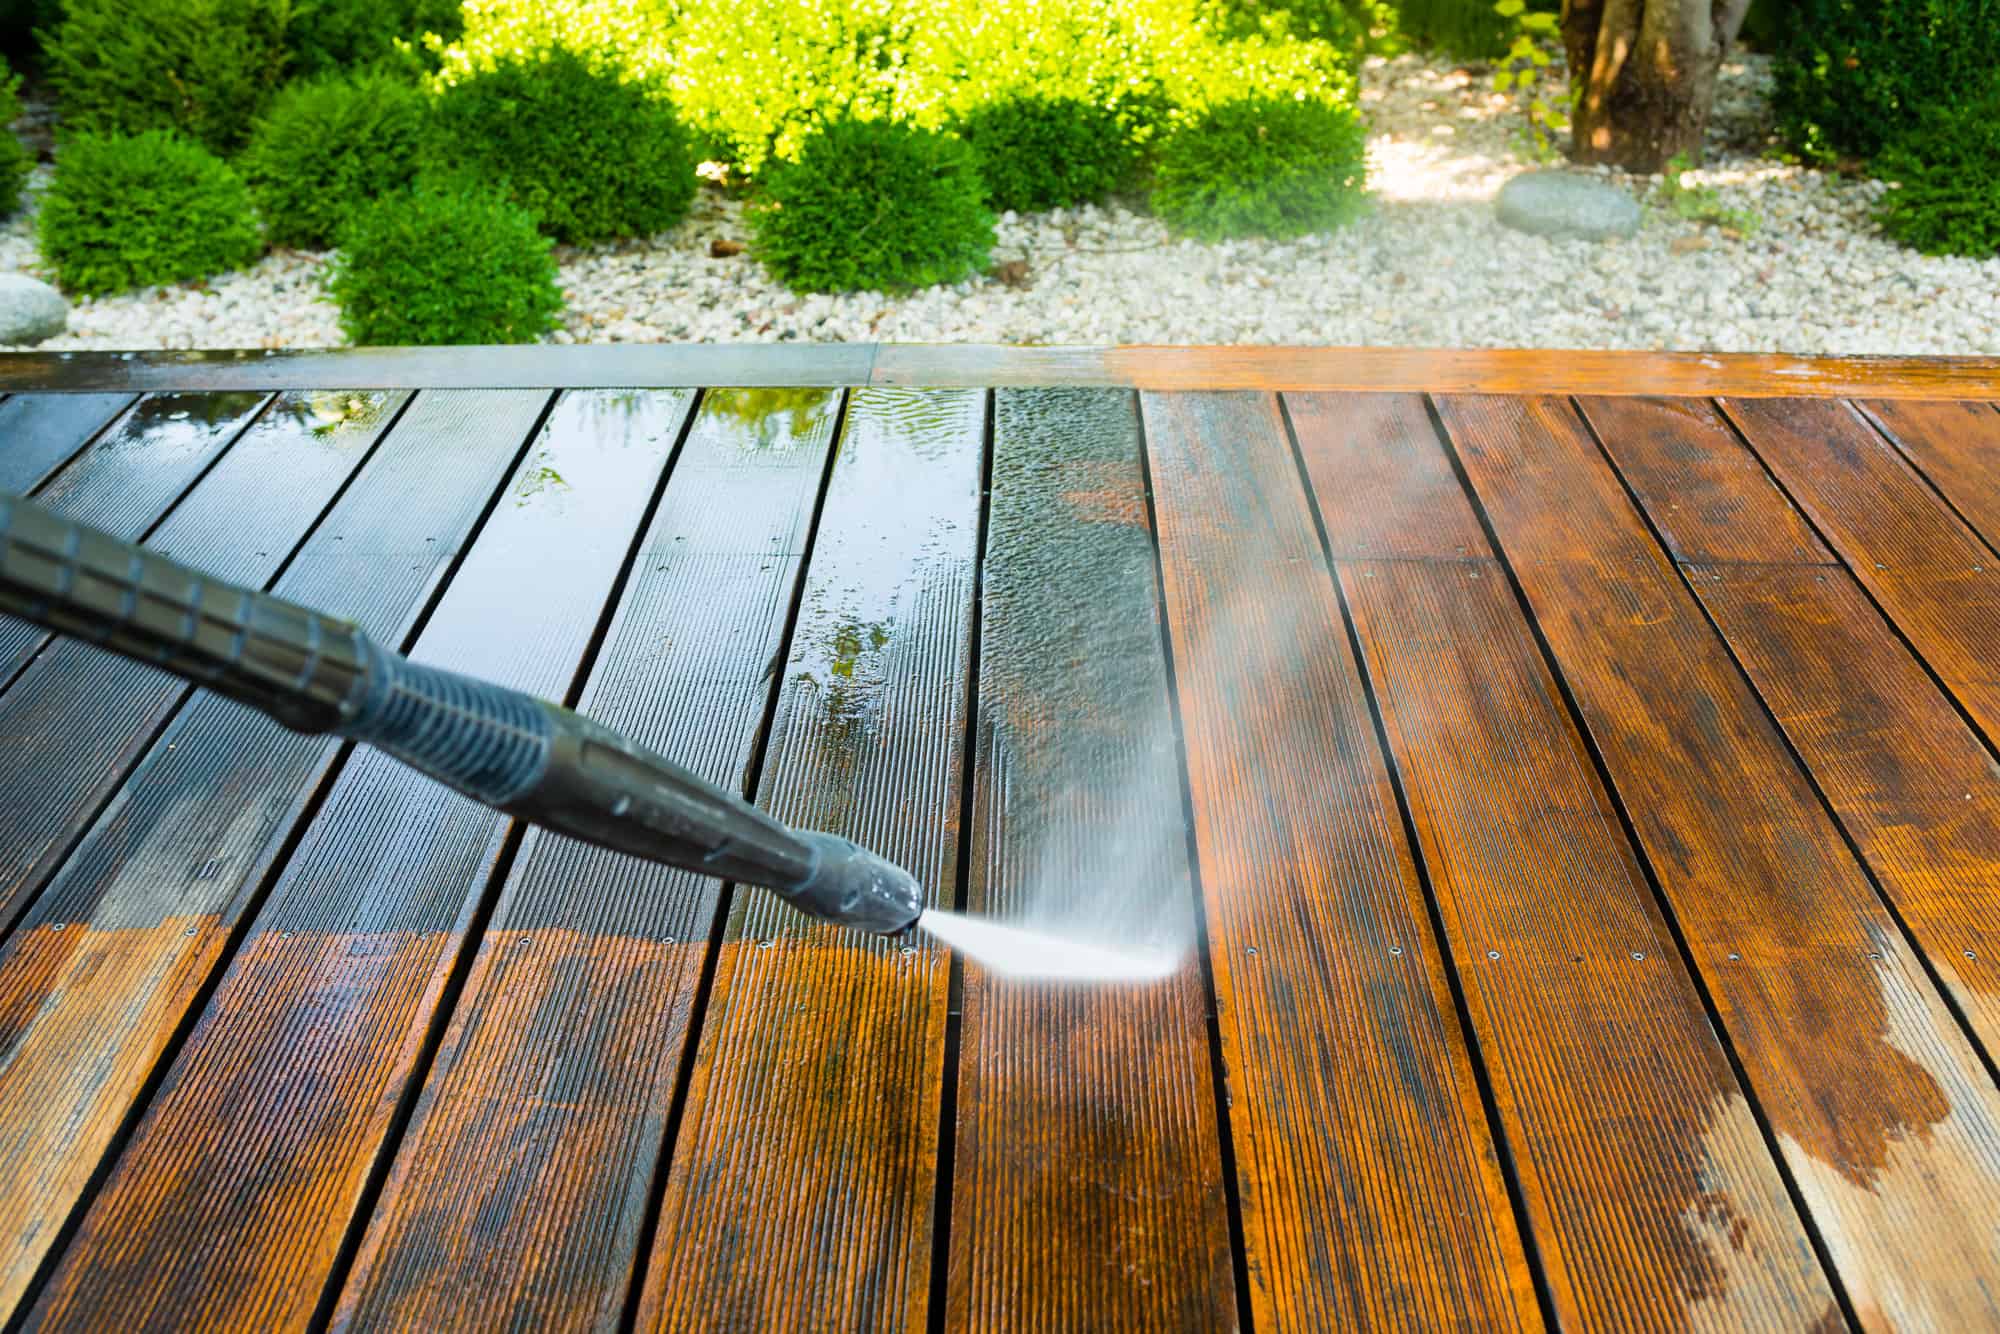 How To Remove Oil Based Stain From Wood: The Ultimate Guide